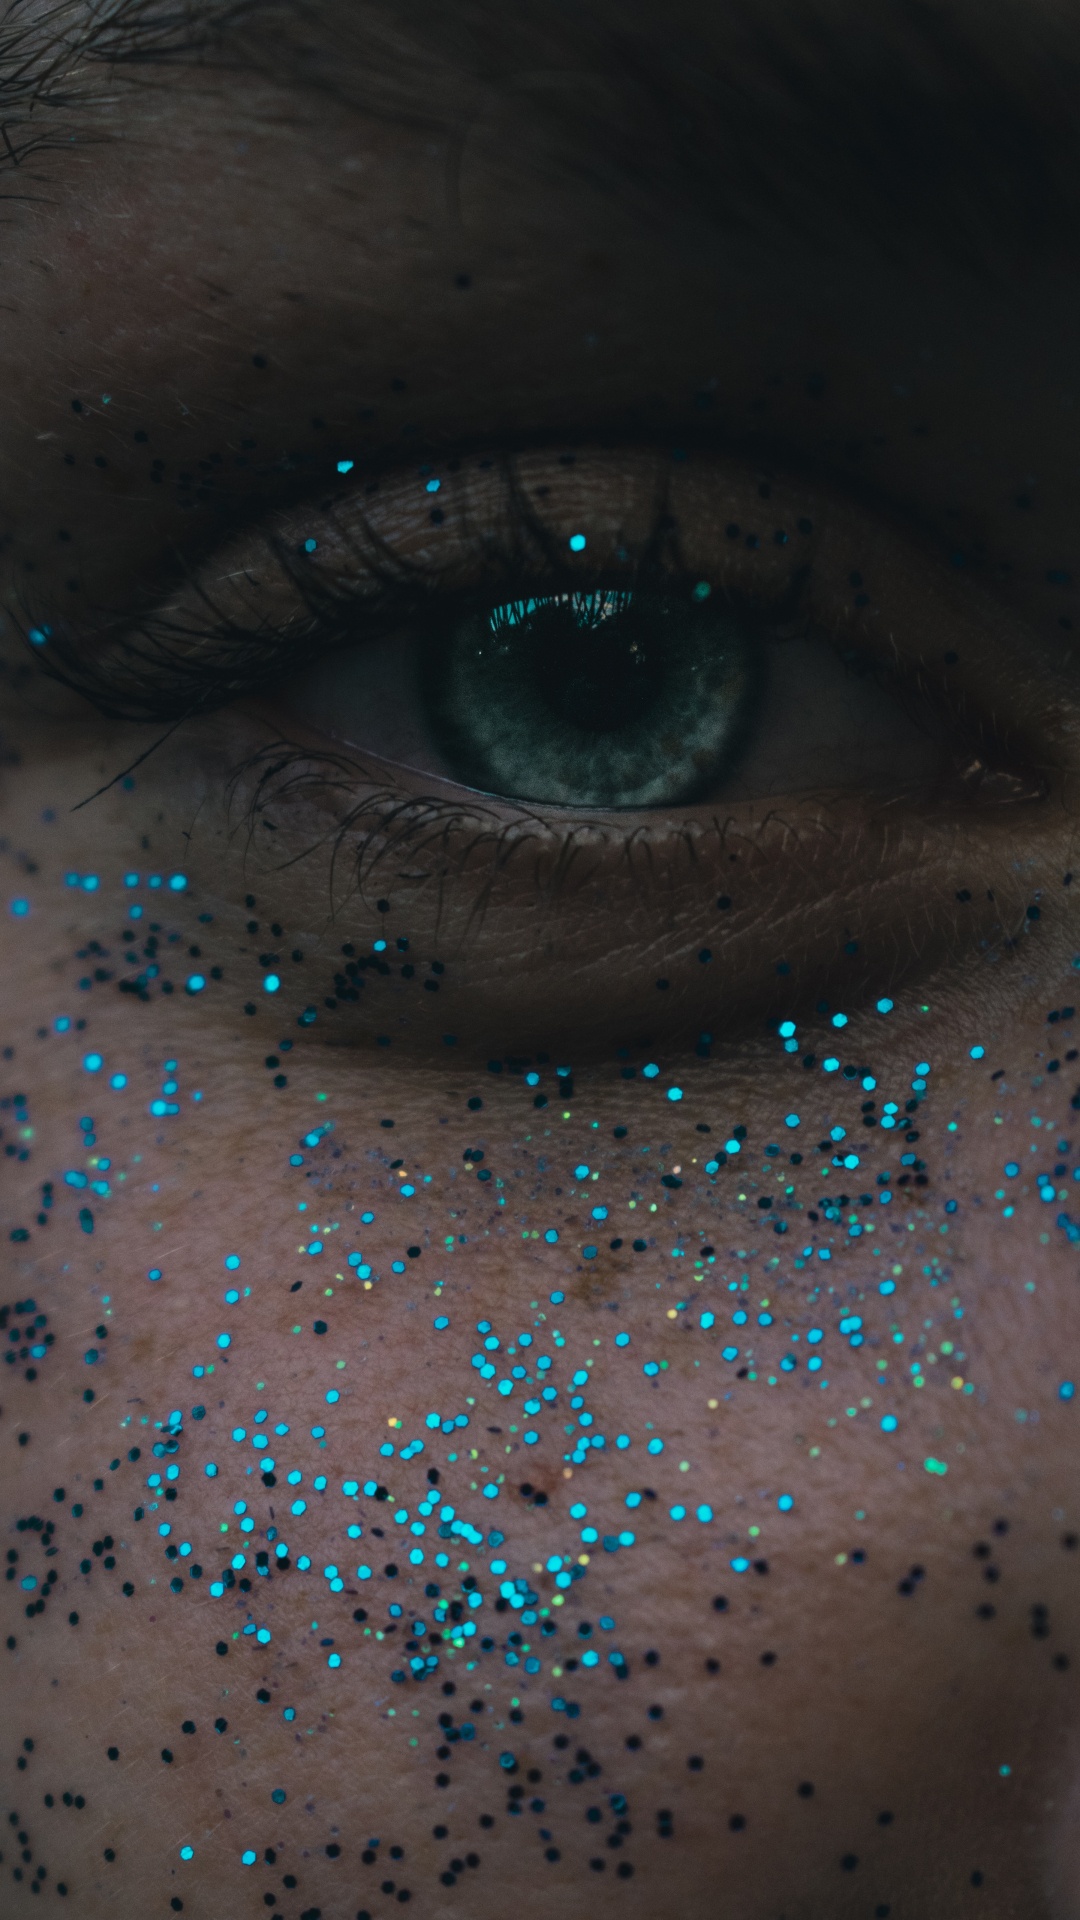 Persons Eye With Blue Eyes. Wallpaper in 1080x1920 Resolution